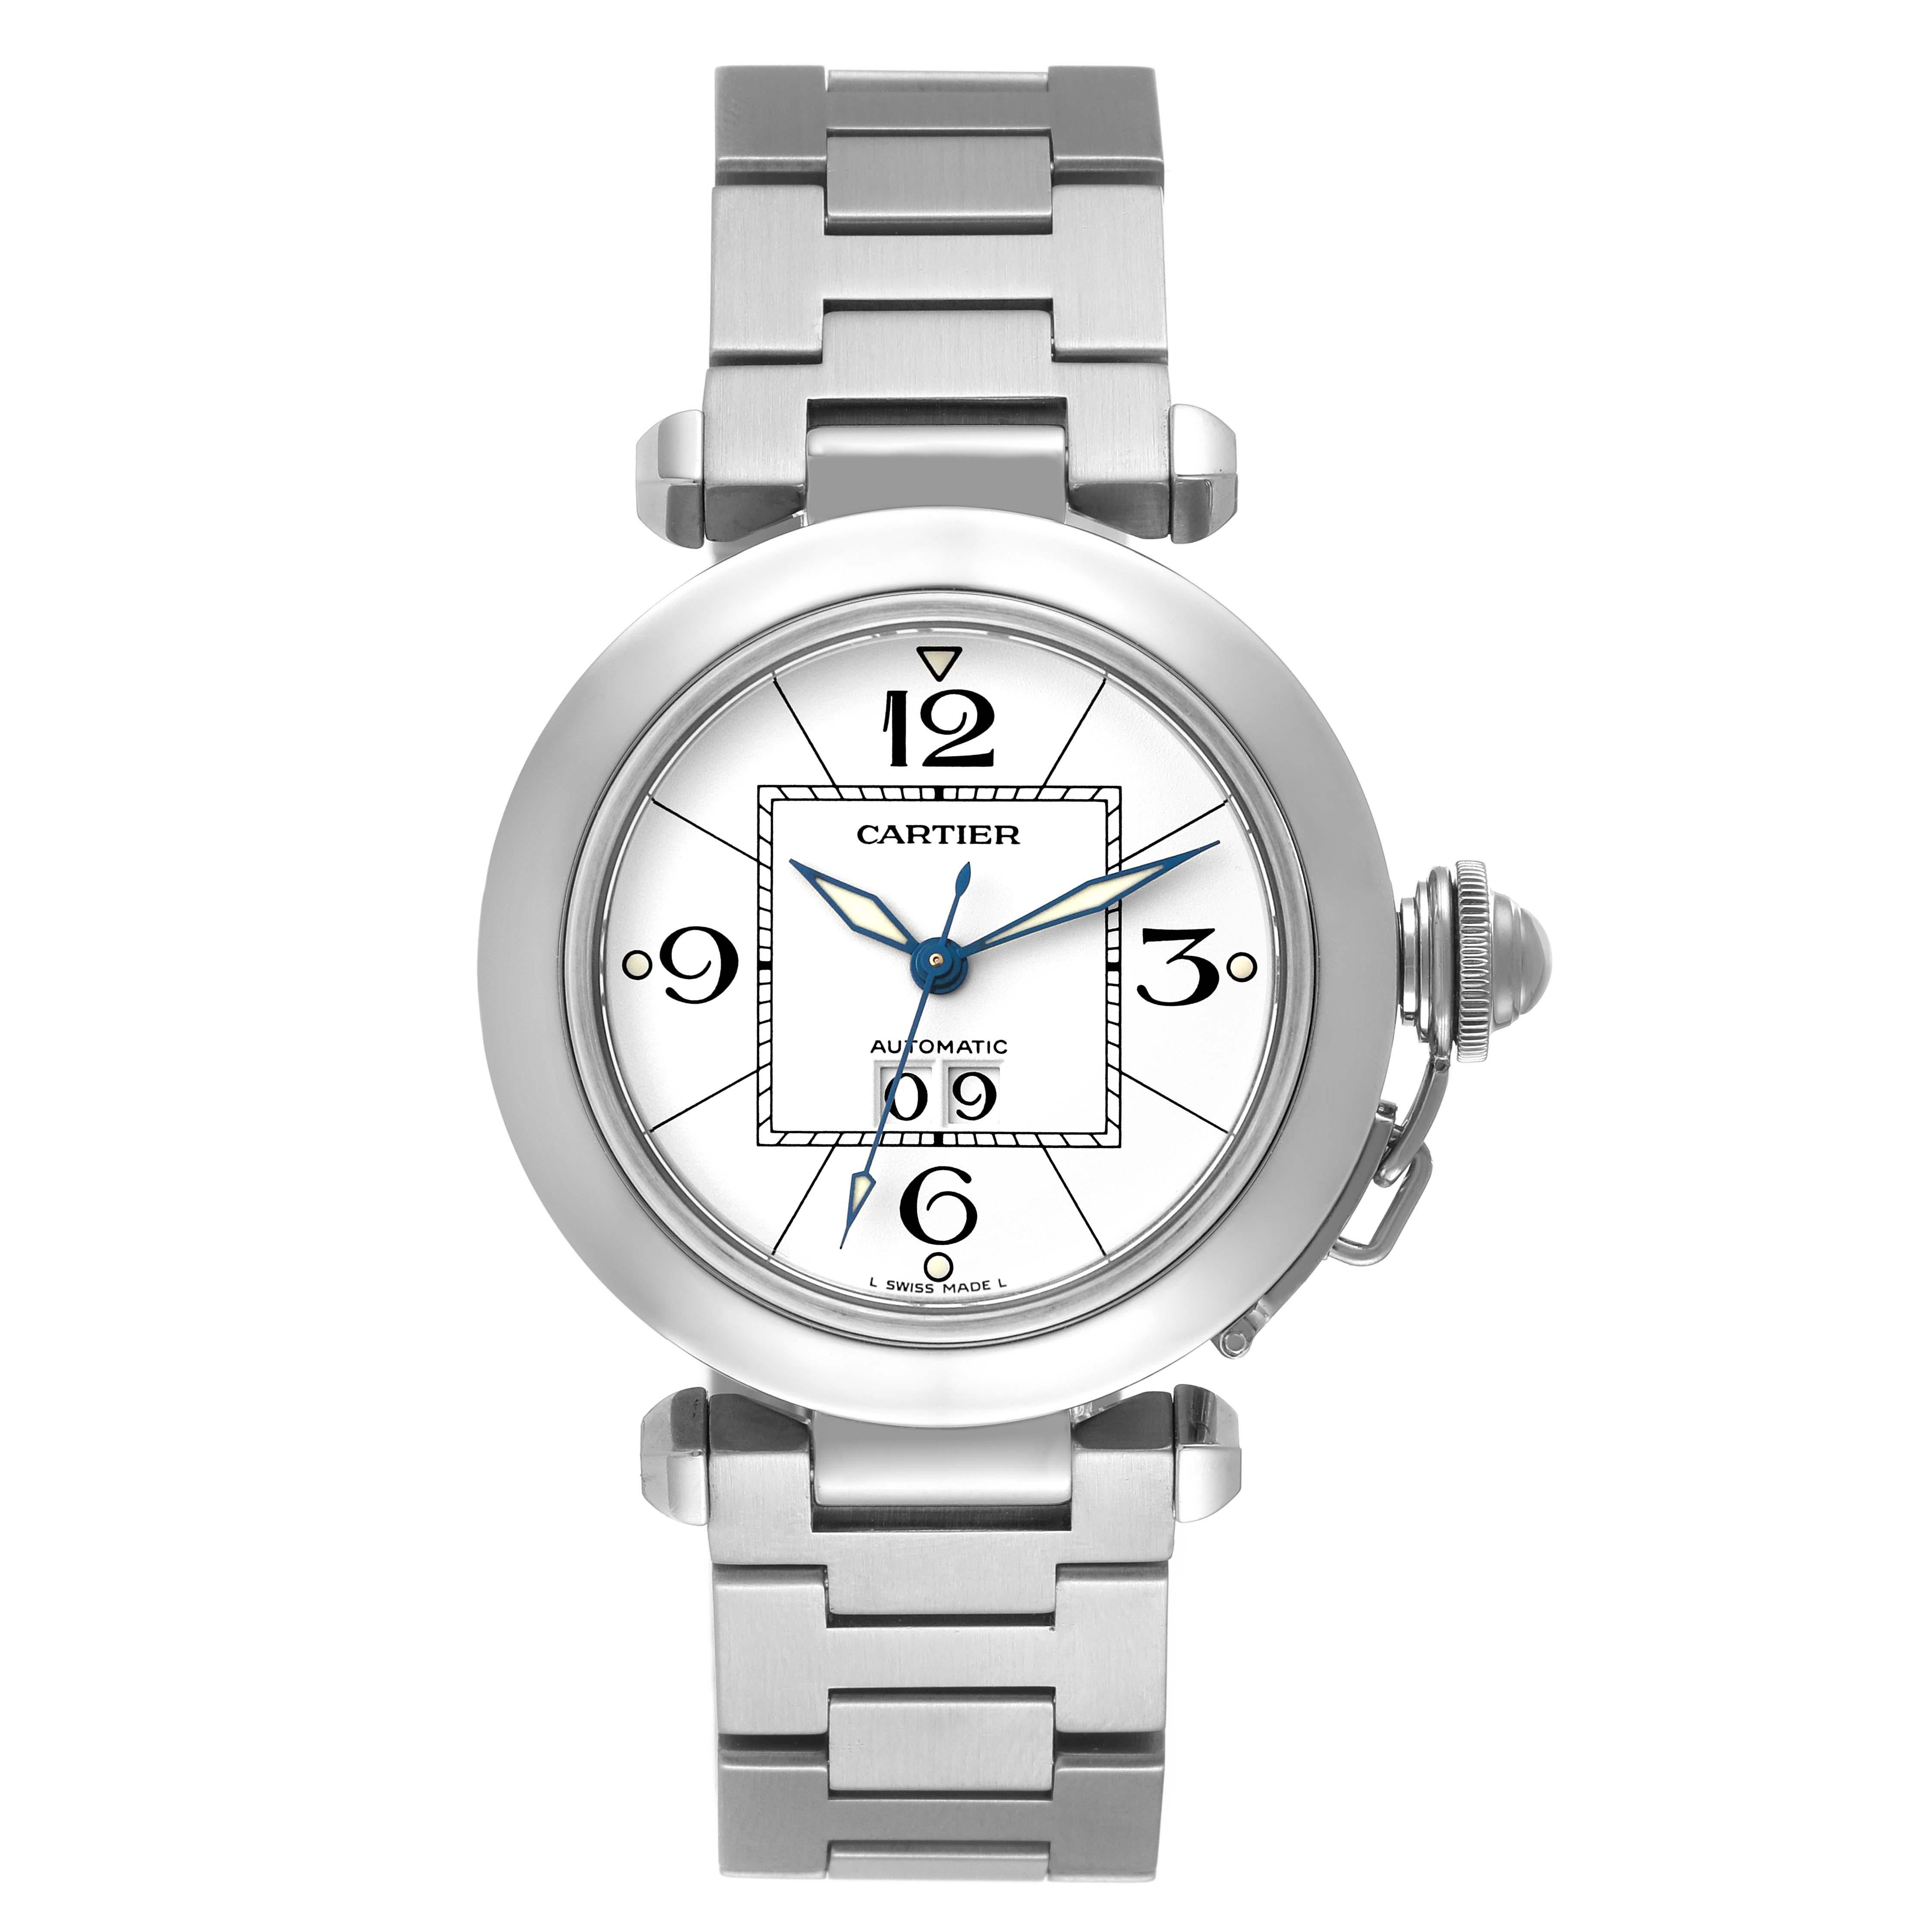 Cartier Pasha C Big Date Midsize Steel White Dial Mens Watch W31055M7 For Sale 2